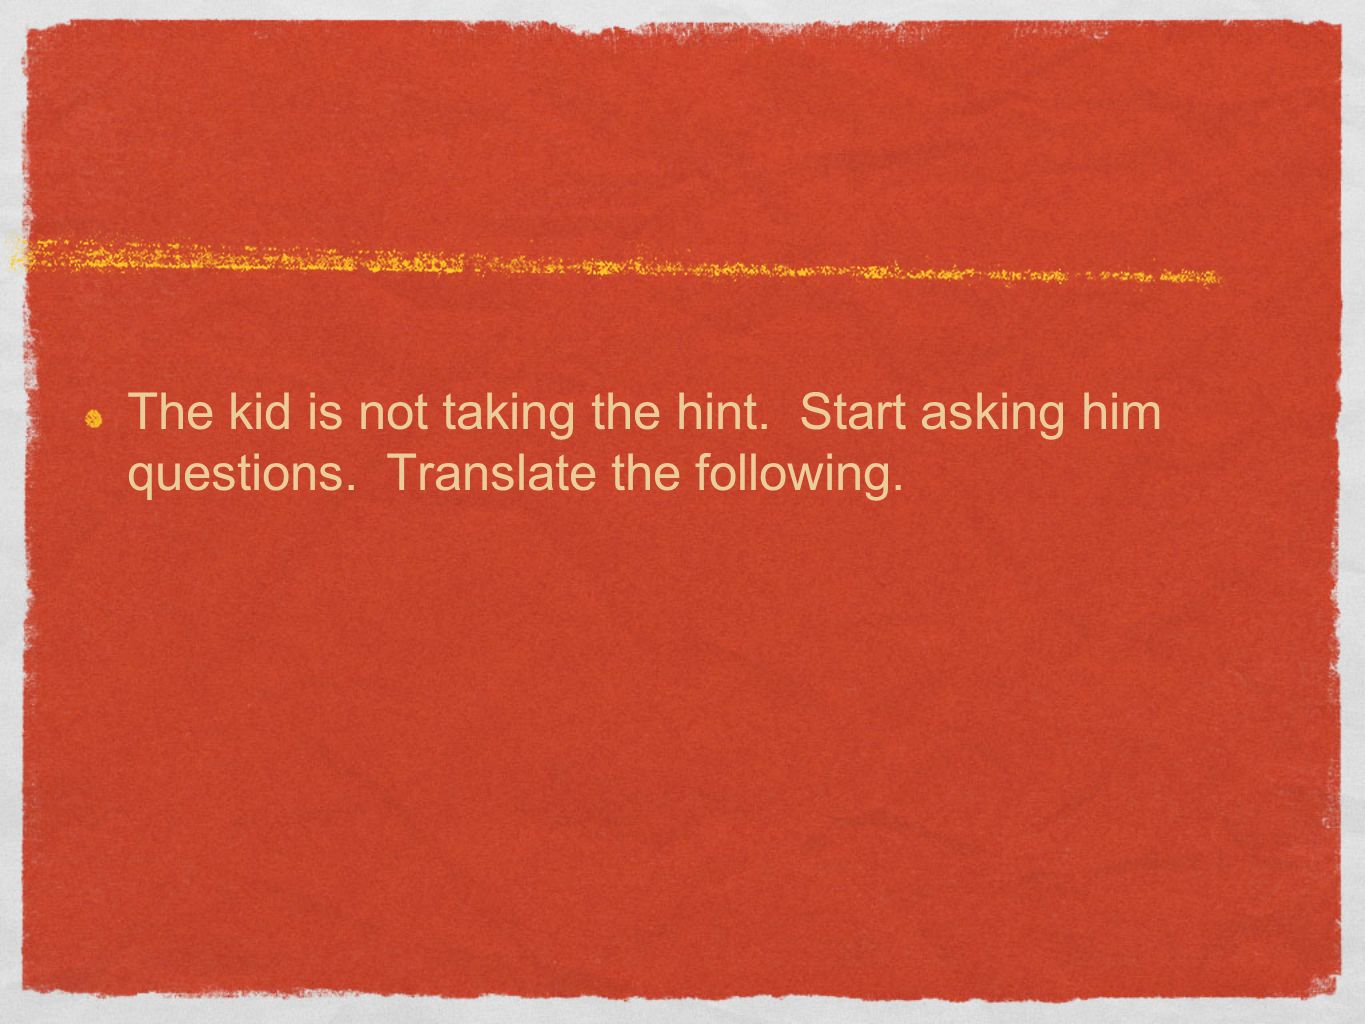 The kid is not taking the hint. Start asking him questions. Translate the following.